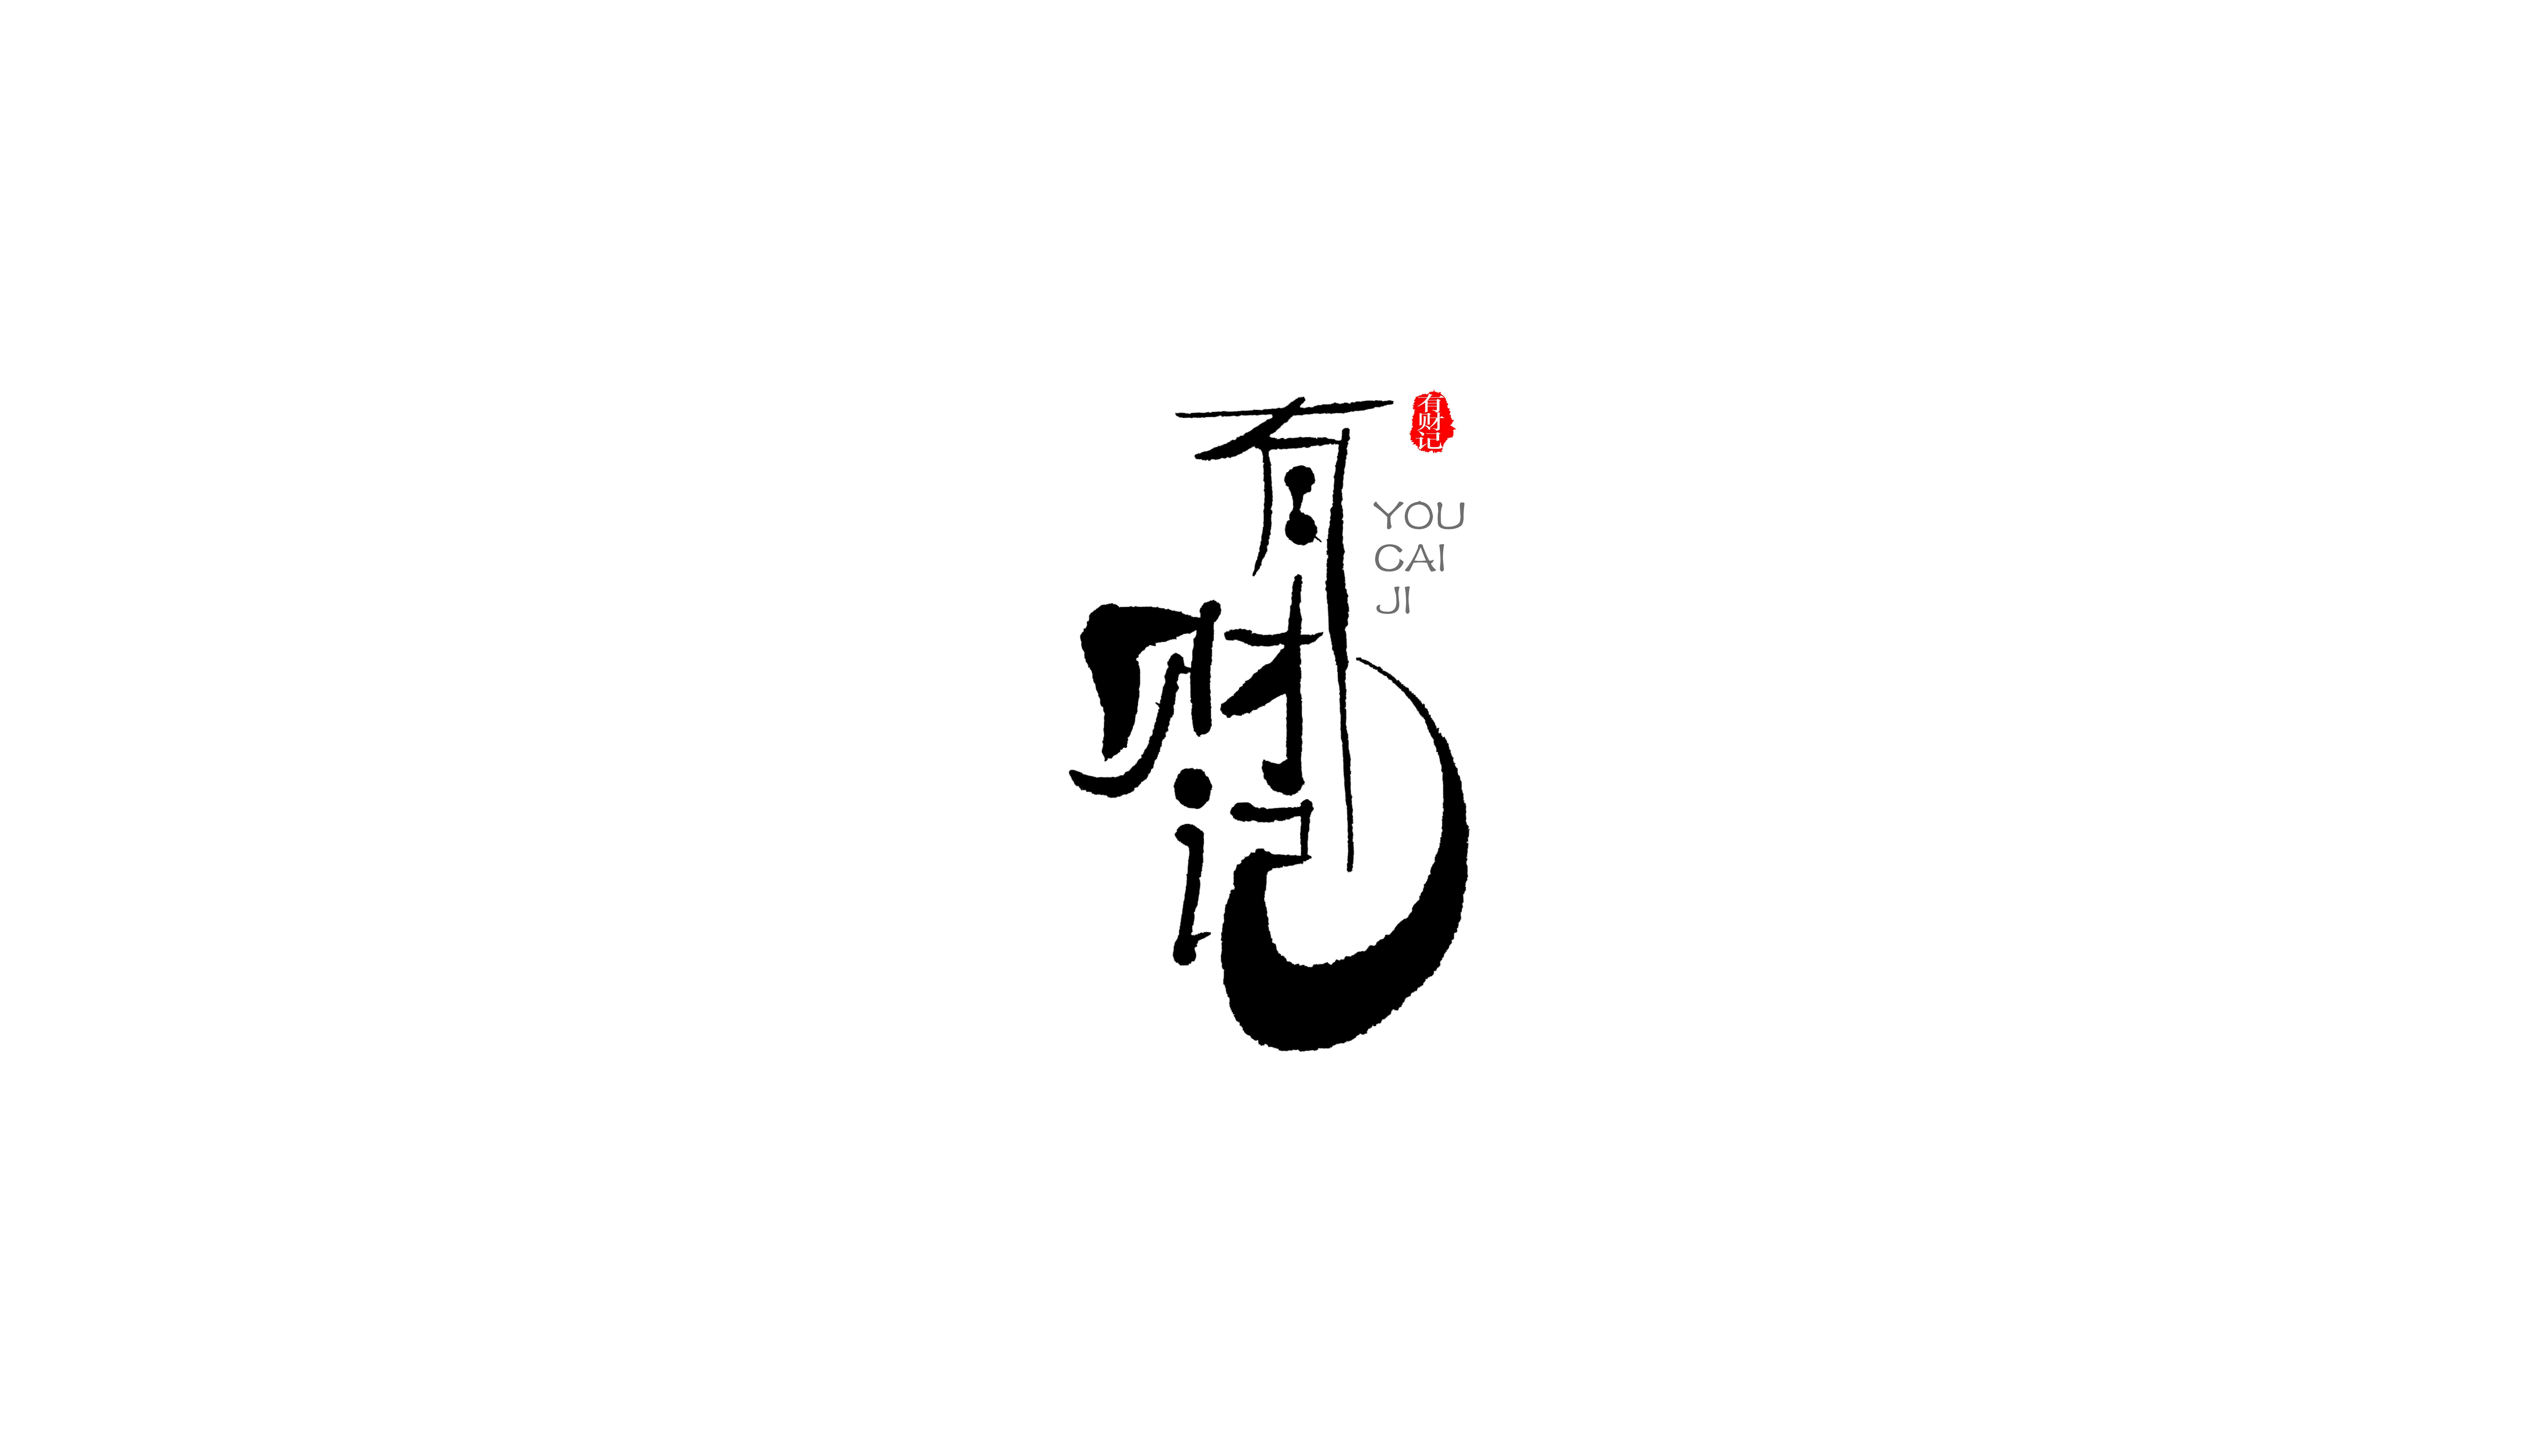 Appreciation of Chinese font design! More than one side